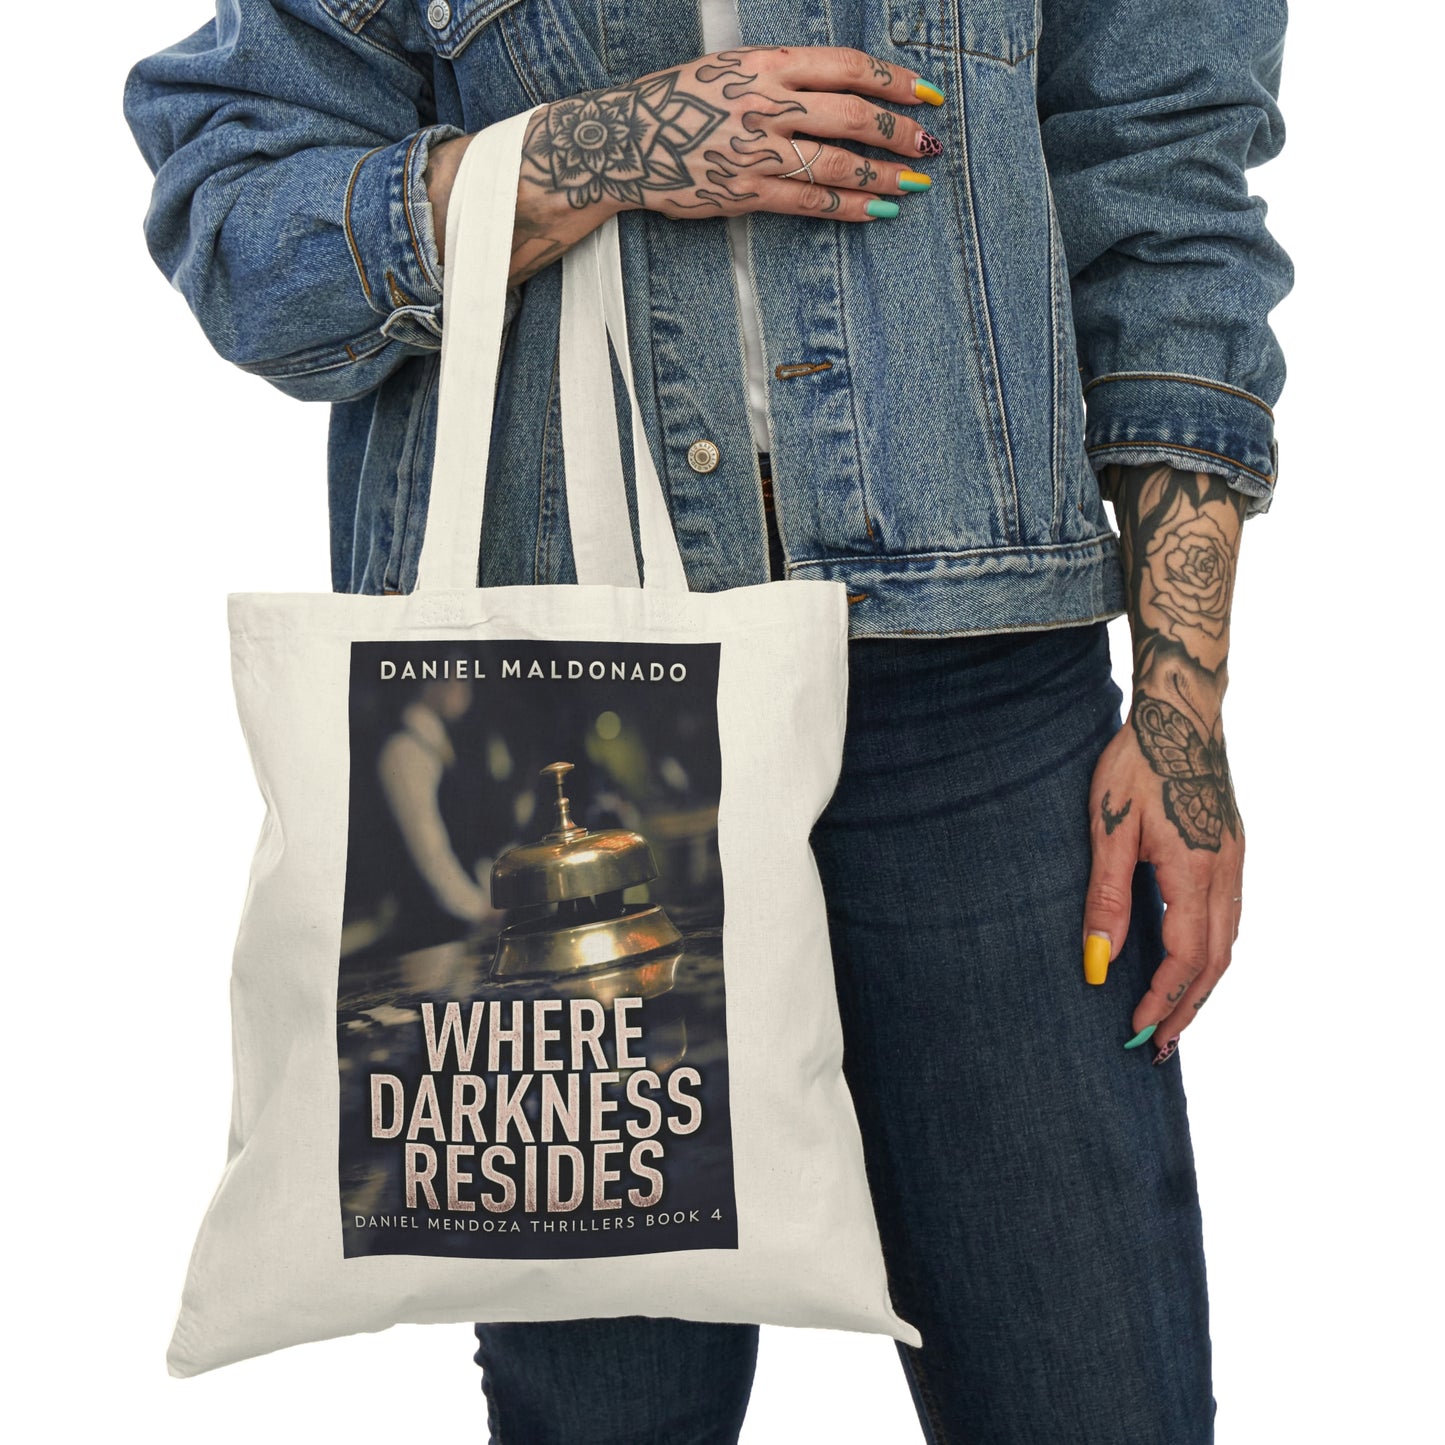 Where Darkness Resides - Natural Tote Bag